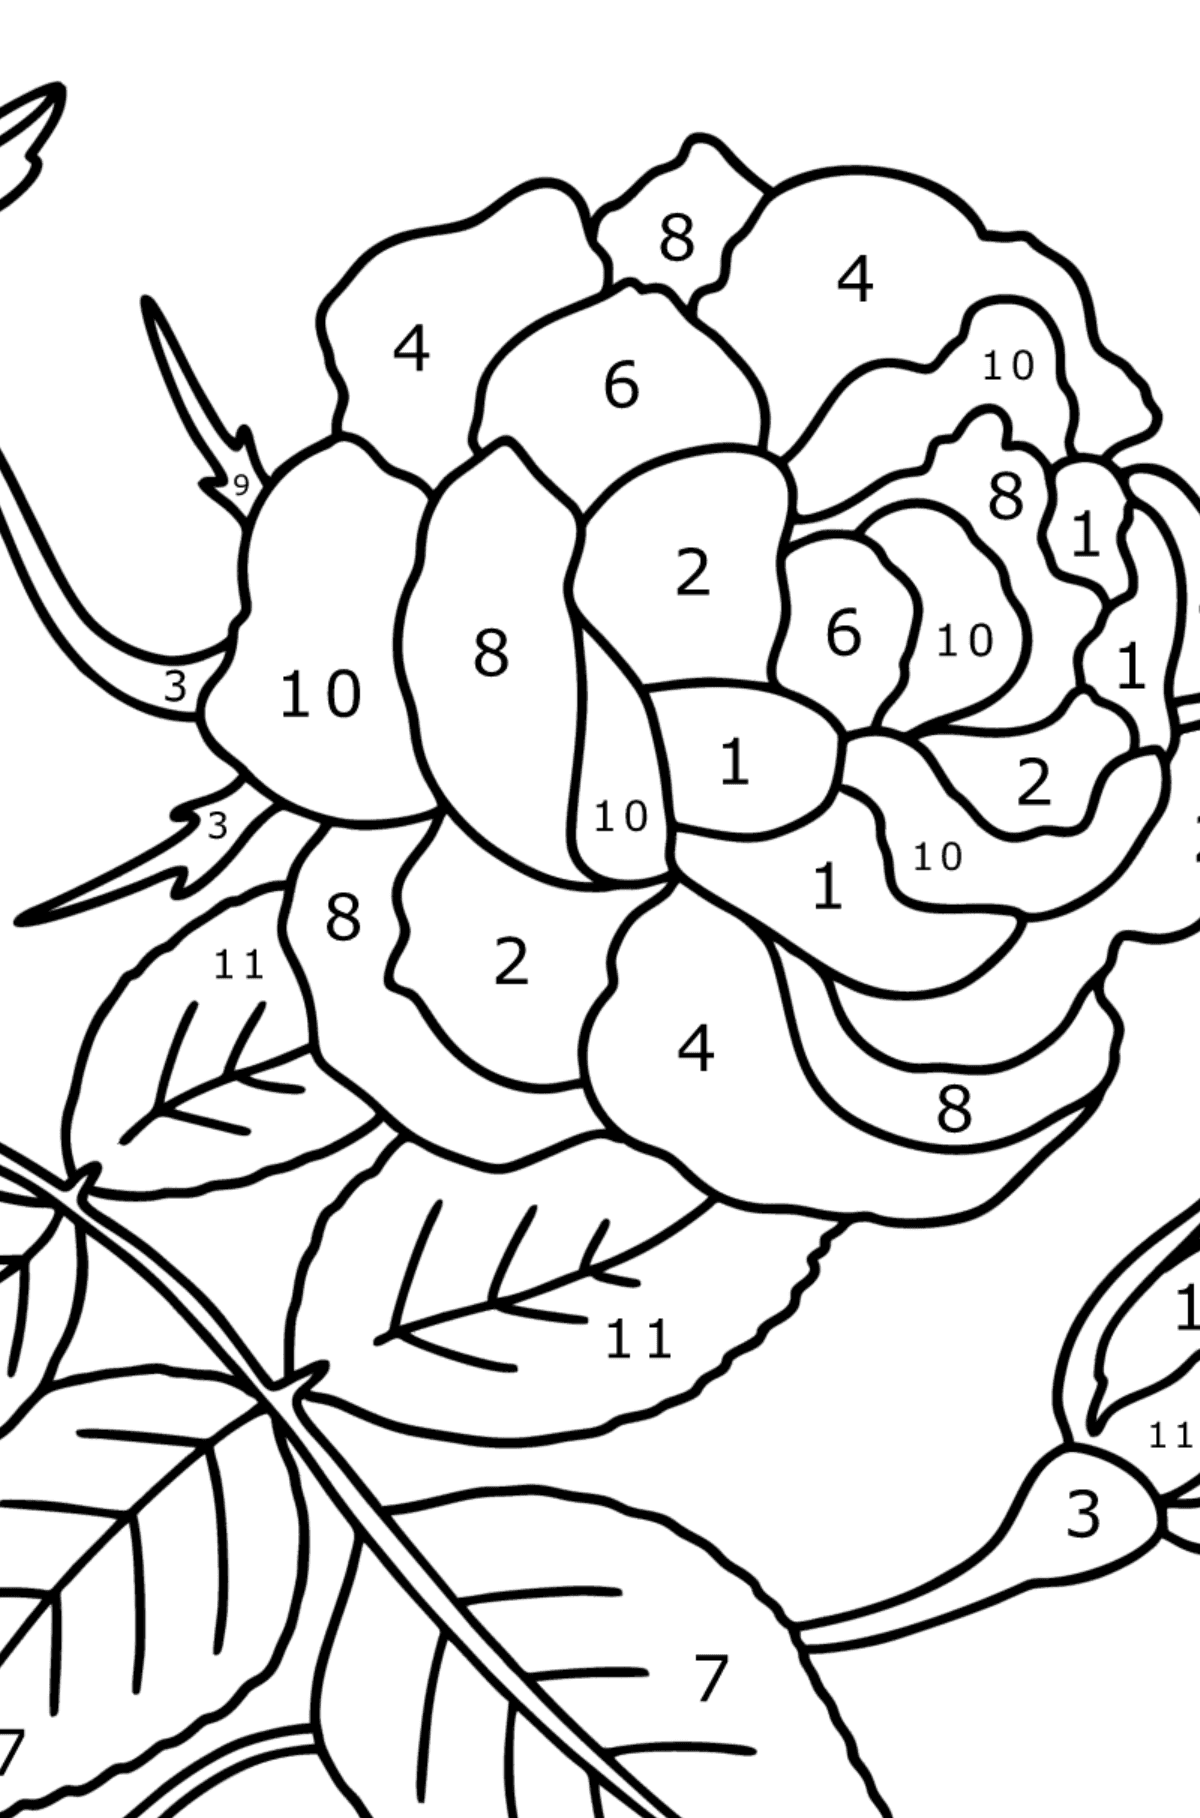 Climbing rose red coloring page - Coloring by Numbers for Kids